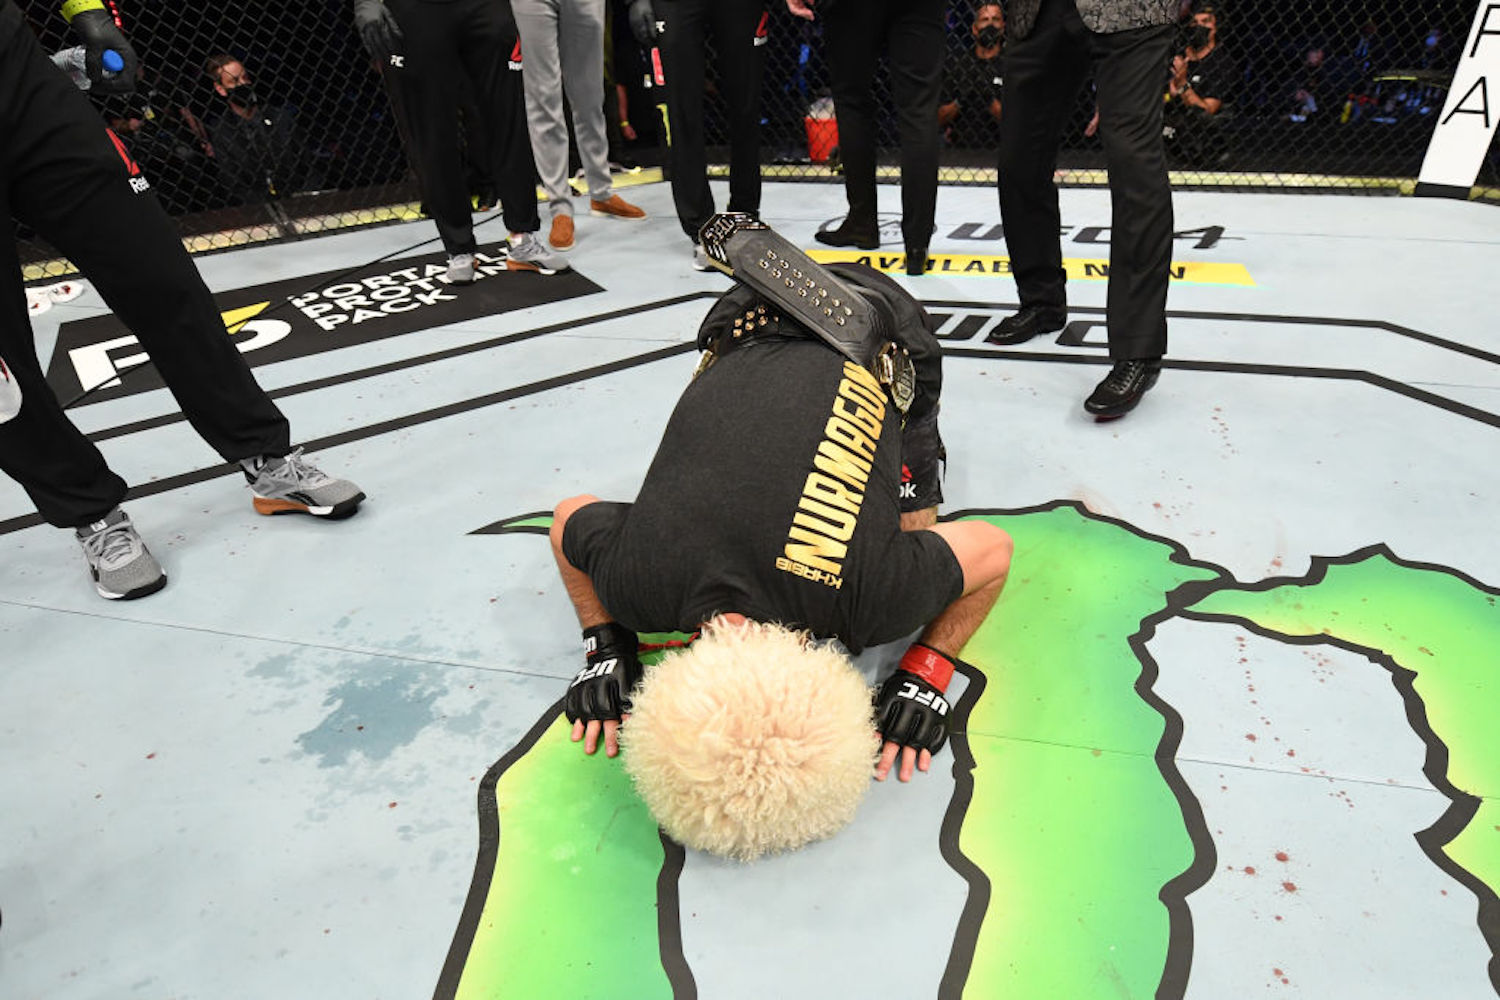 Khabib Nurmagomedov announced his retirement after defeating Justin Gaethje, and it sounds like he won't be going back on that decision.